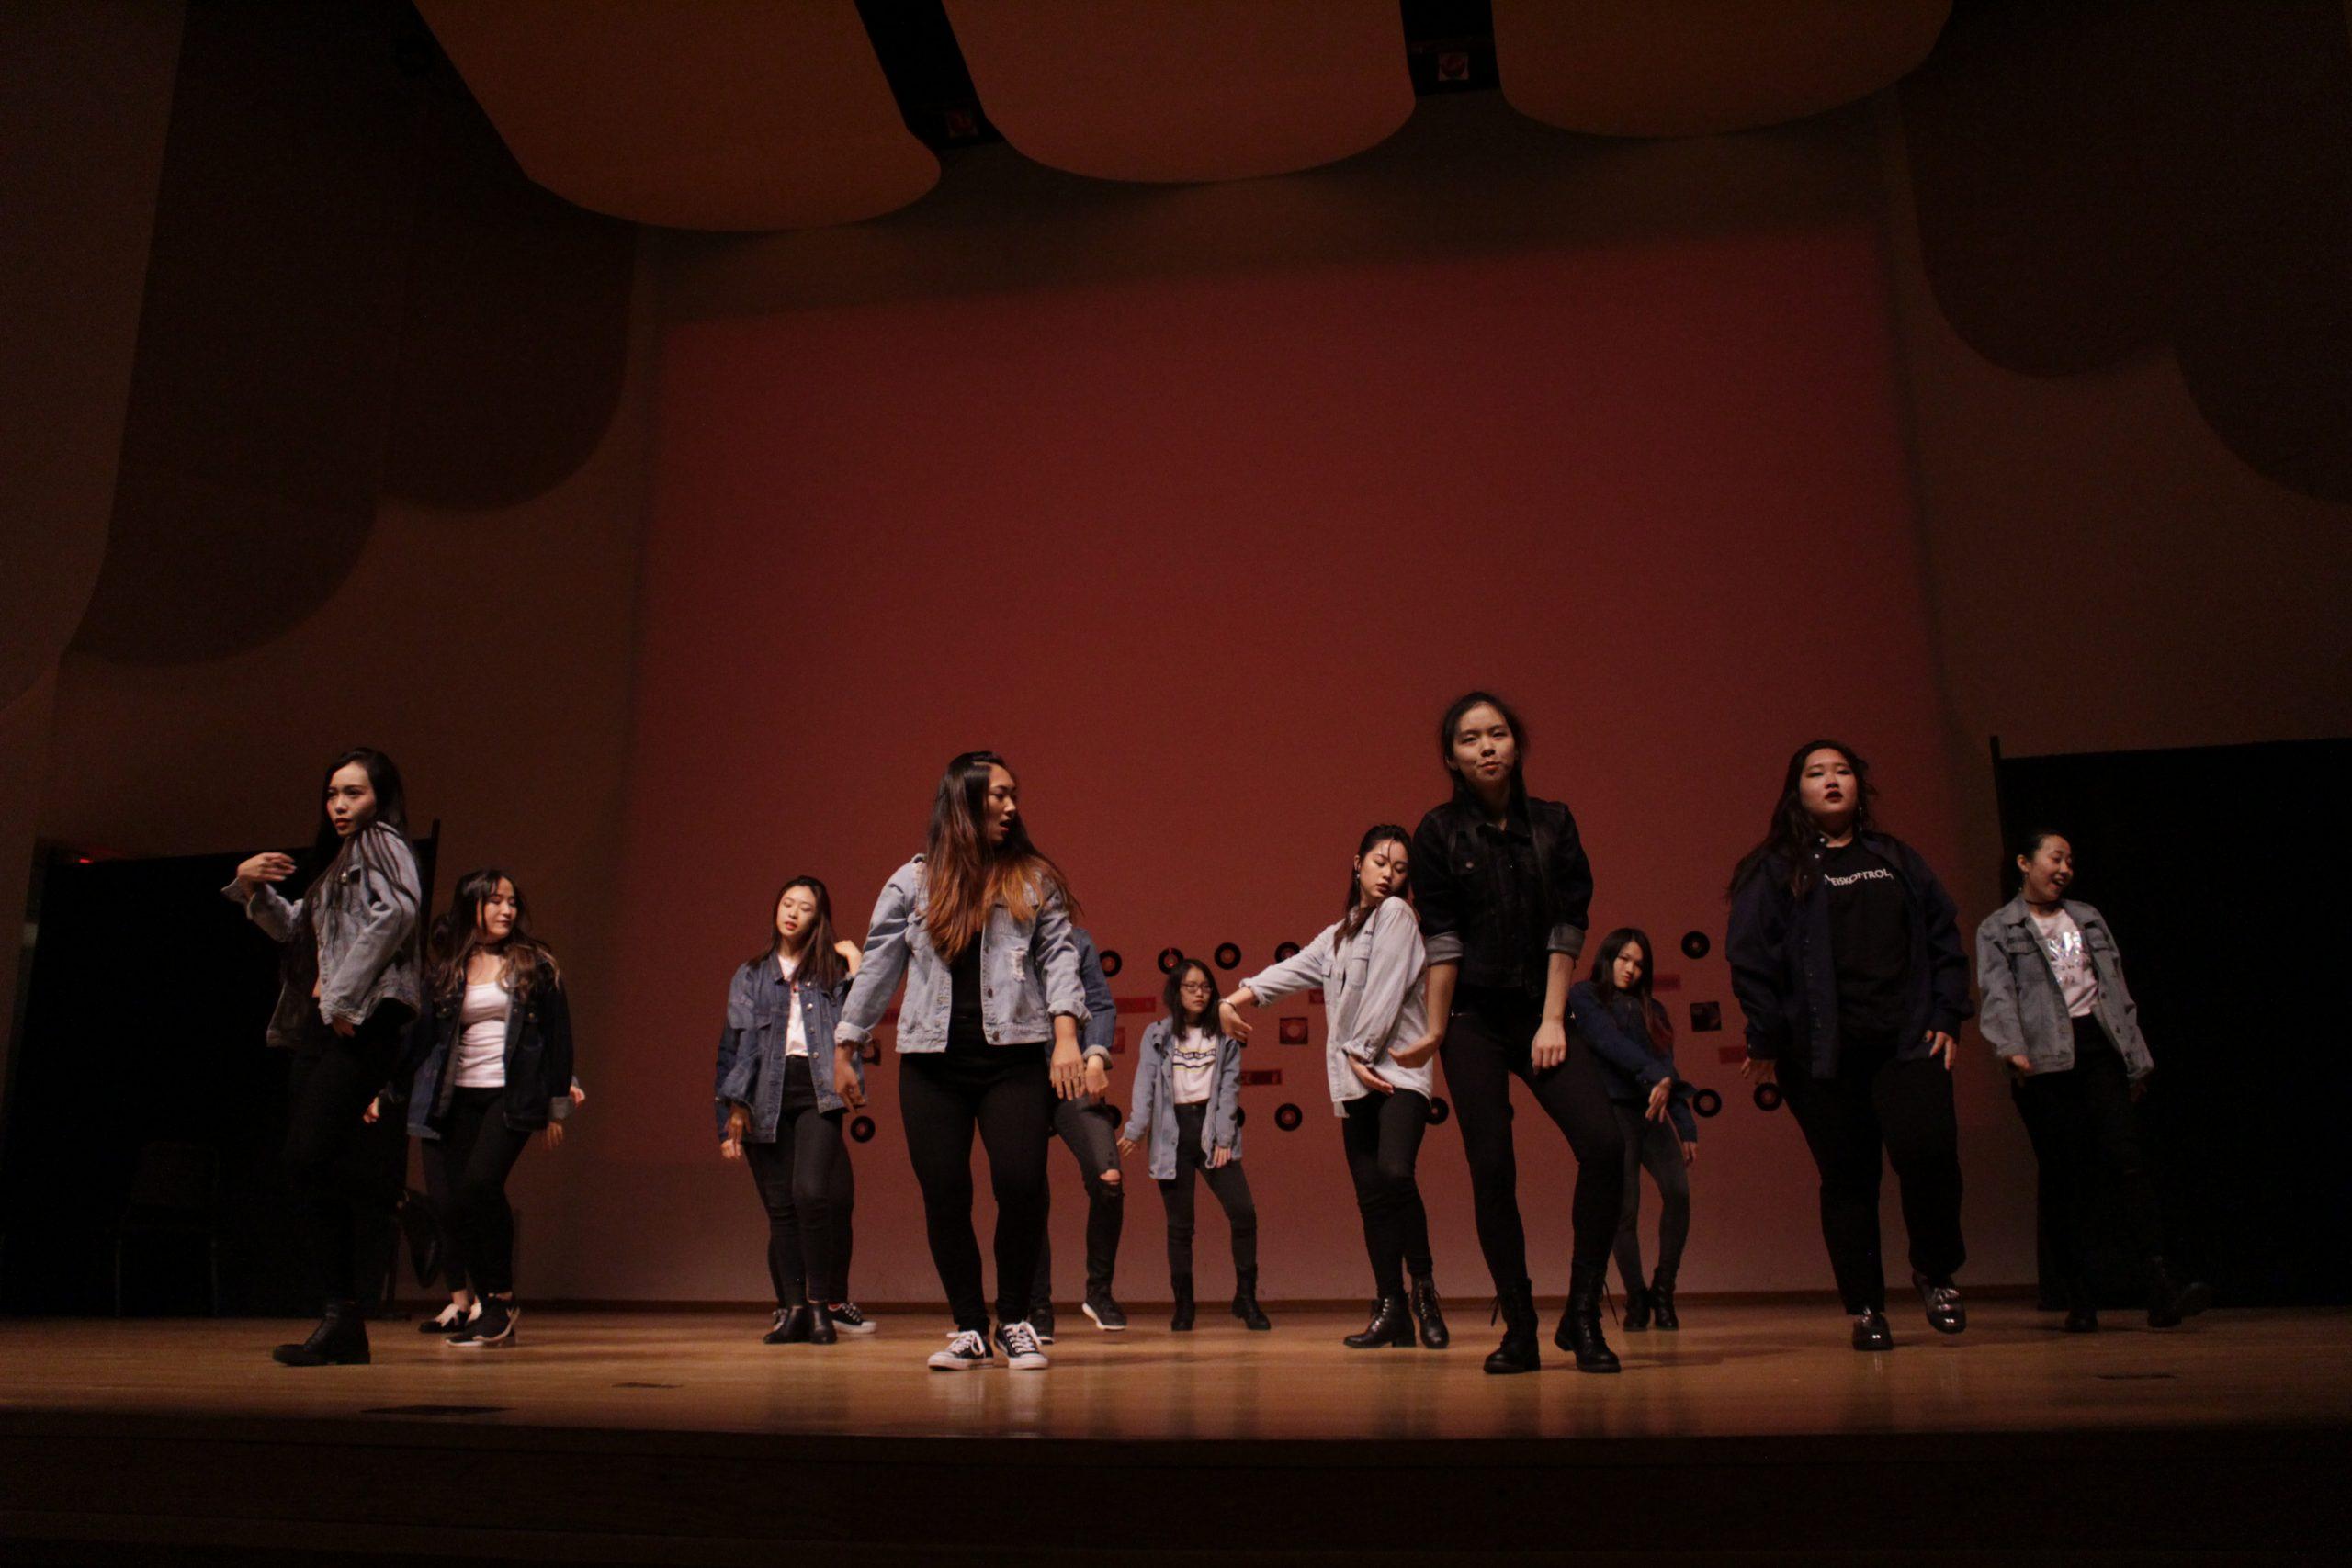 Dance crews put new spin on old music